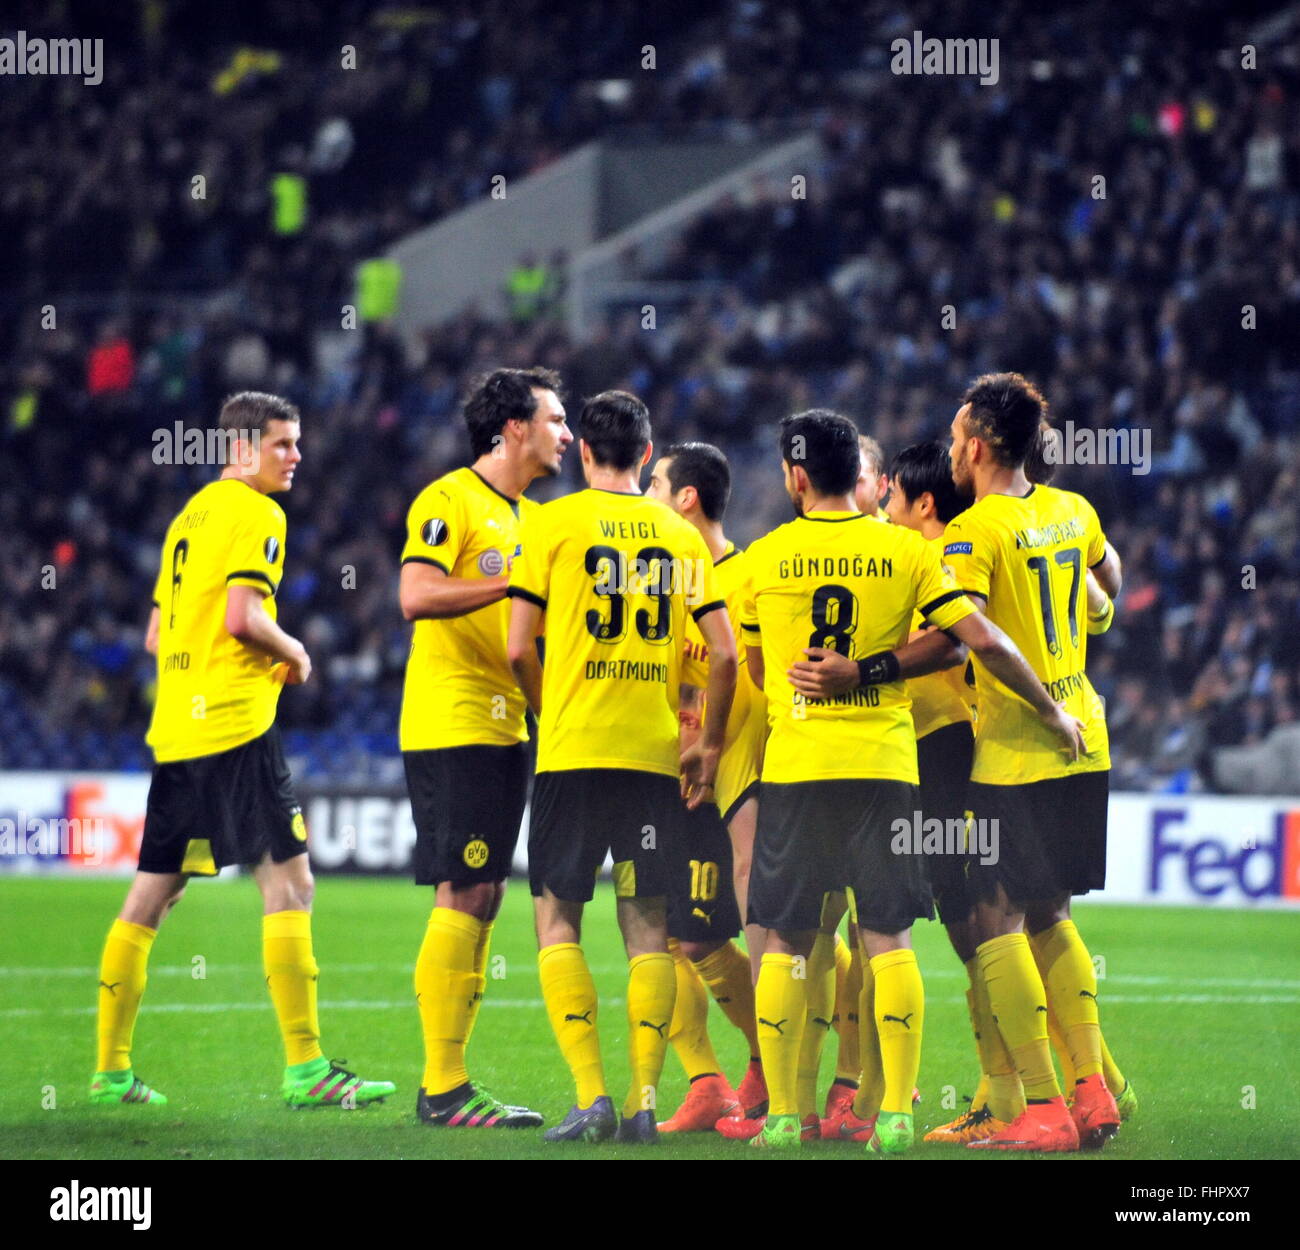 Porto, Portugal. 25th Feb, 2016. Dortmund's players celebrate after scoring  during the second leg of round 16 of the Europa League soccer match between  FC Porto and Borussia Dortmund in Porto, Portugal,